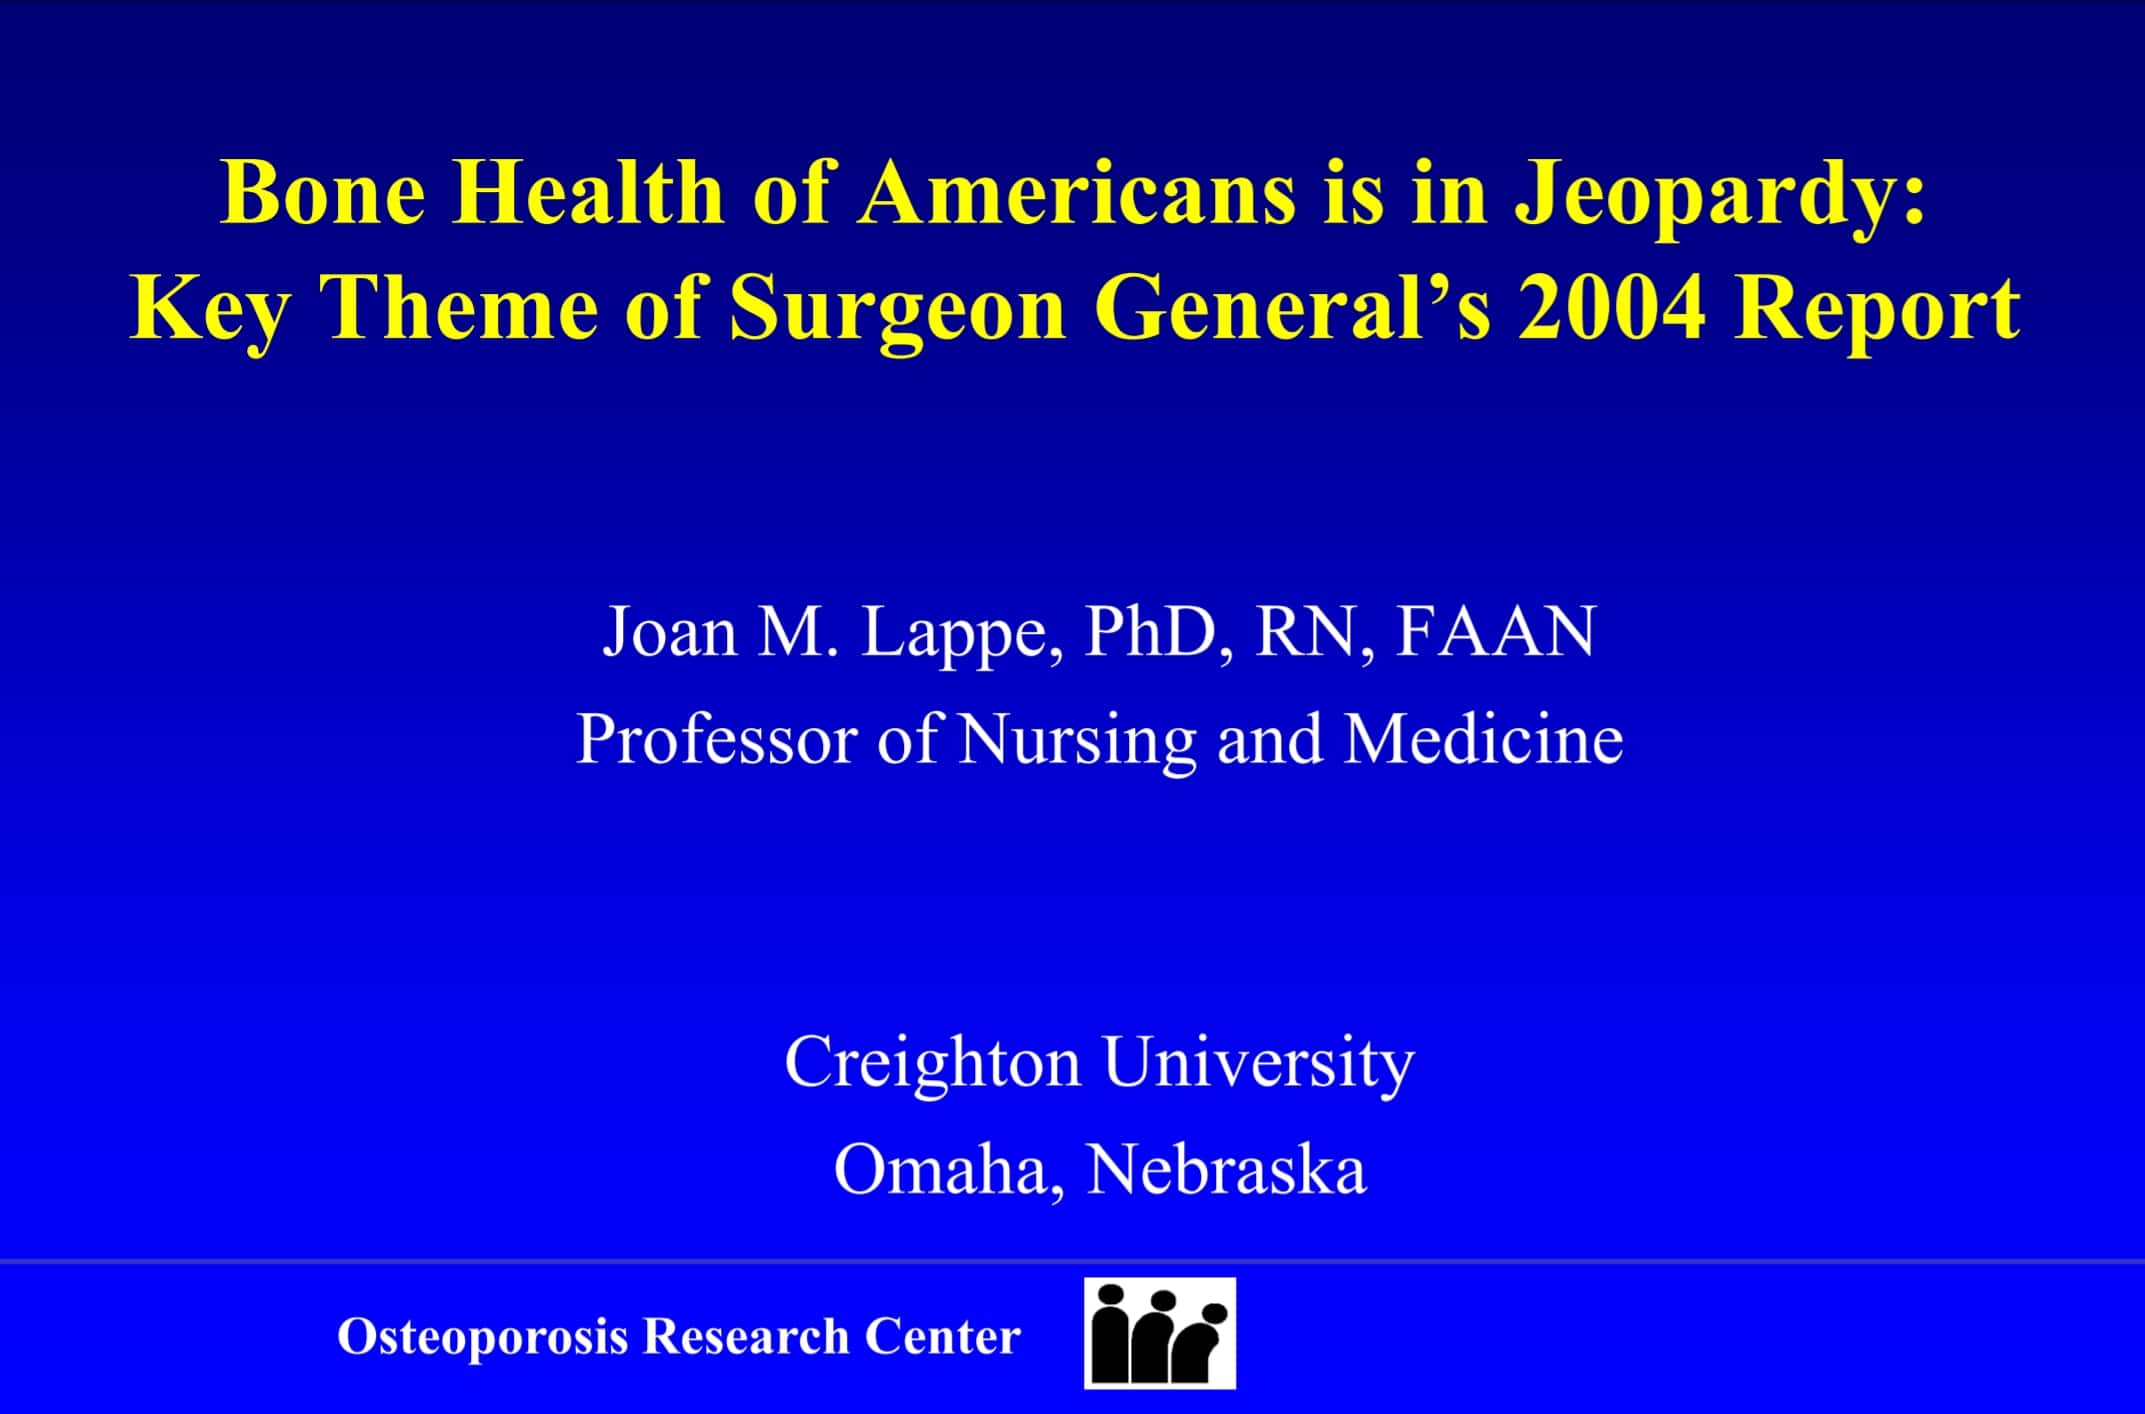 "Bone Health of Americans is in Jeopardy" presentation cover.